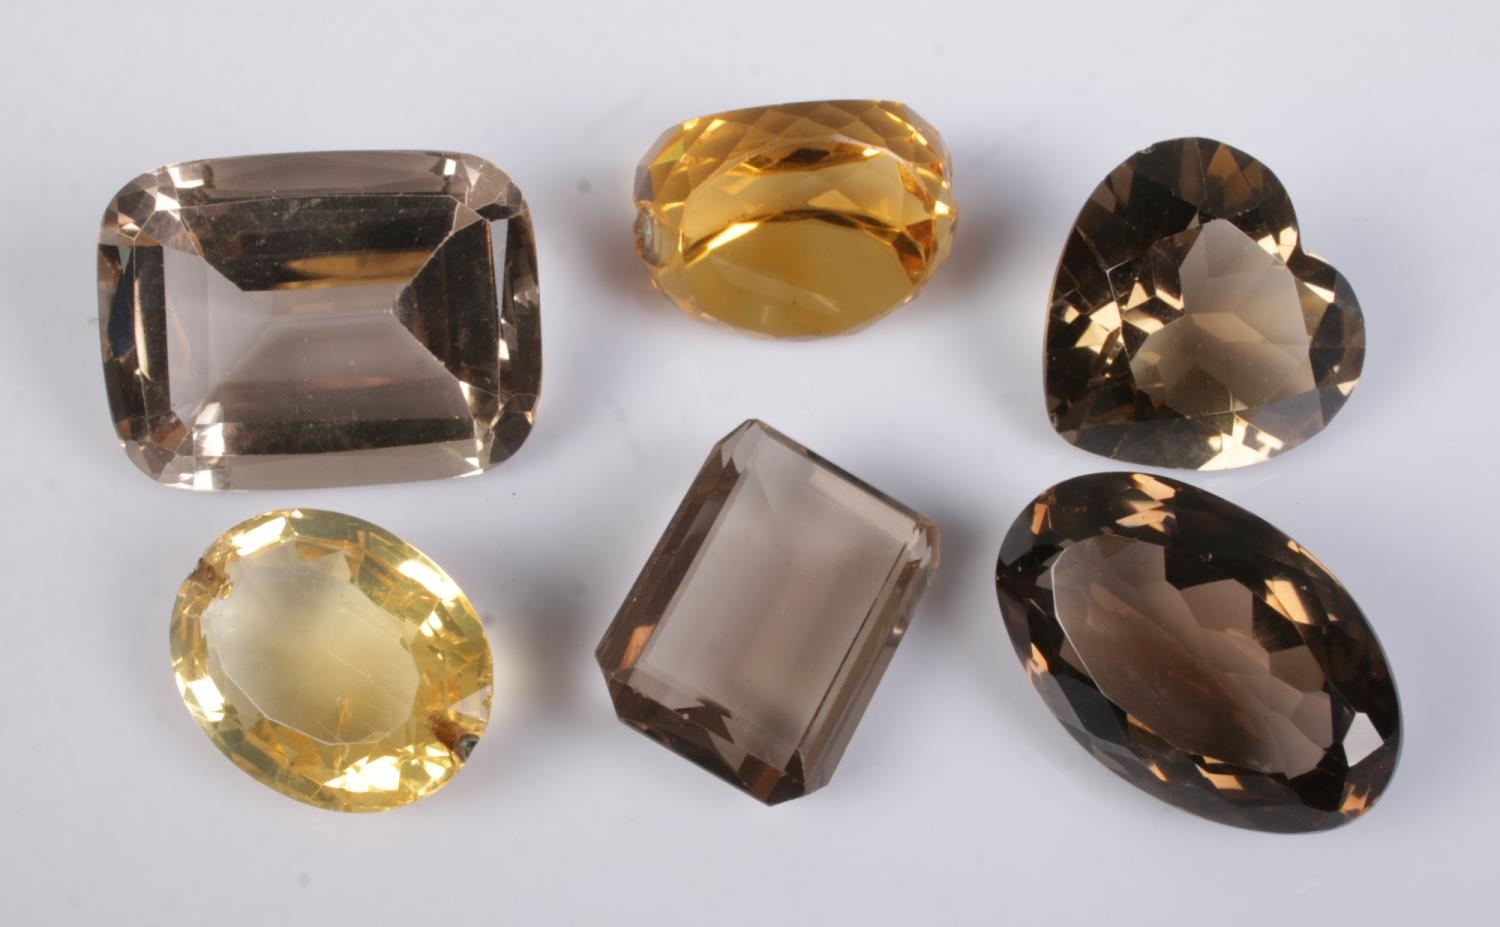 A collection of loose cut Smokey Quartz and Citrine stones to include heart shaped example.